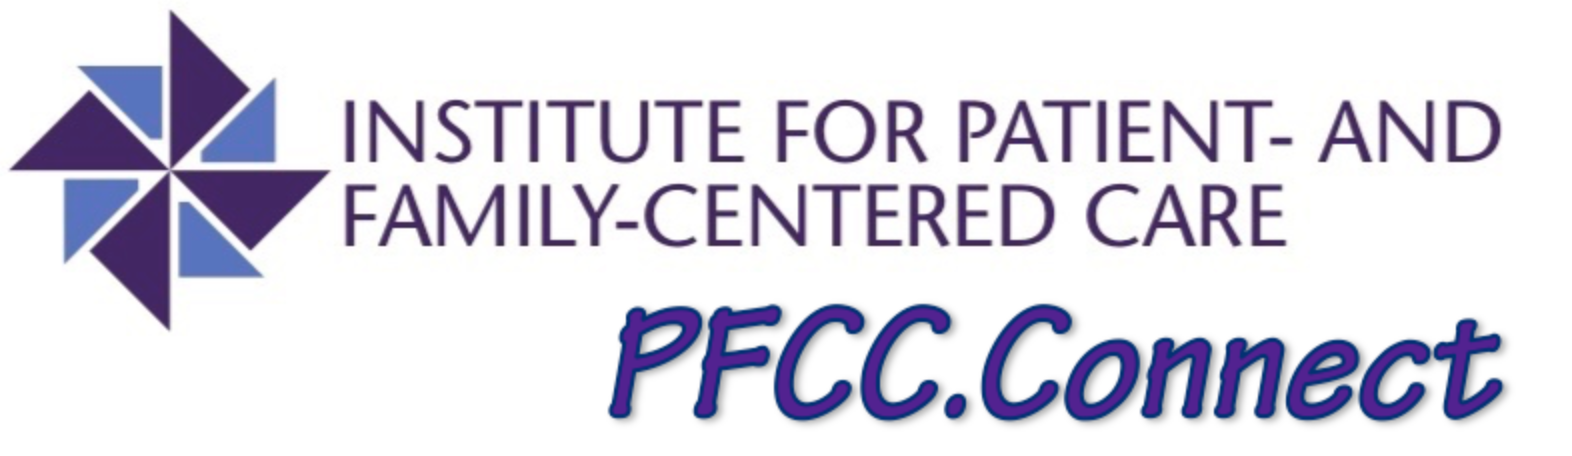 PFCC.Connect Logo